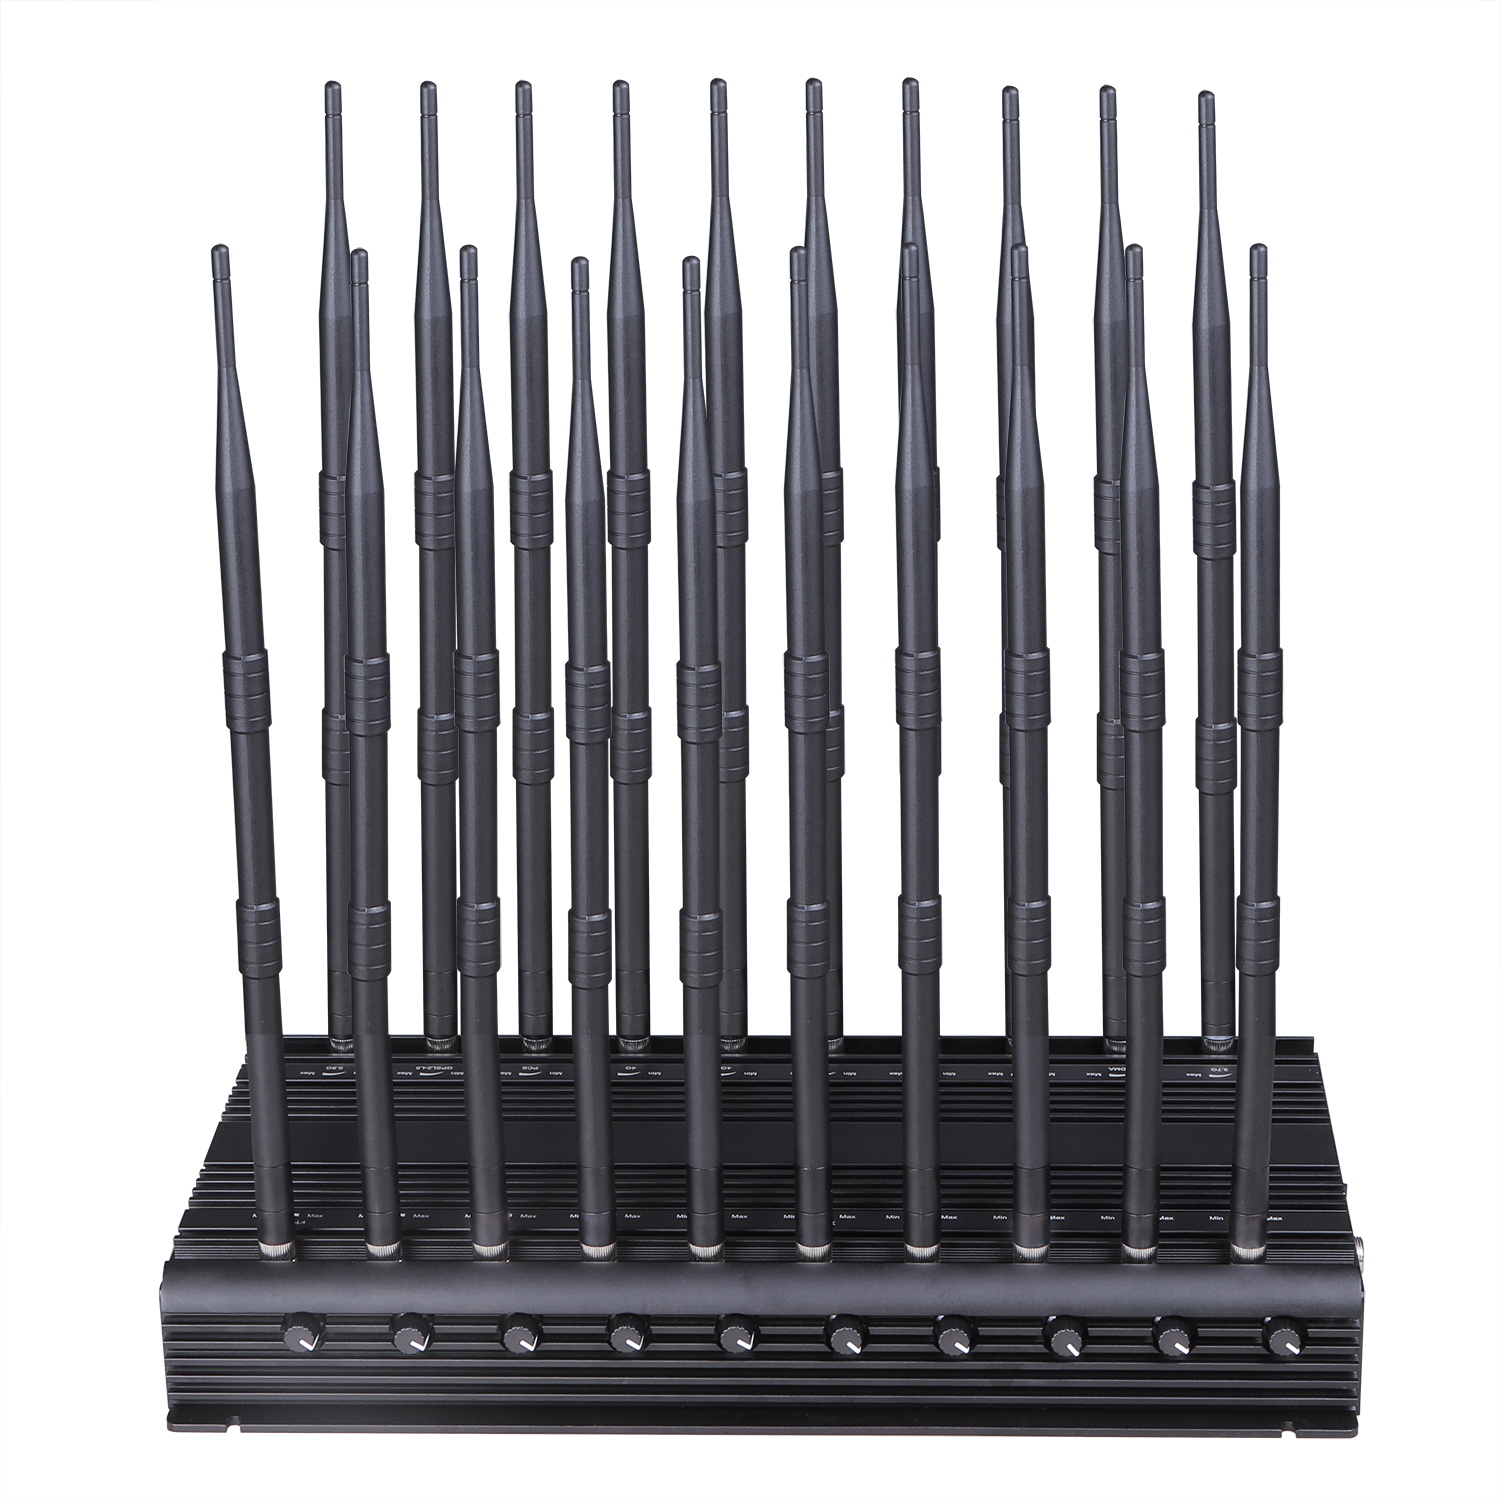 20 antennas all-in-one 5G mobile phone including 3.5G 3.7G all frequencies Signal jammer With Remote Control